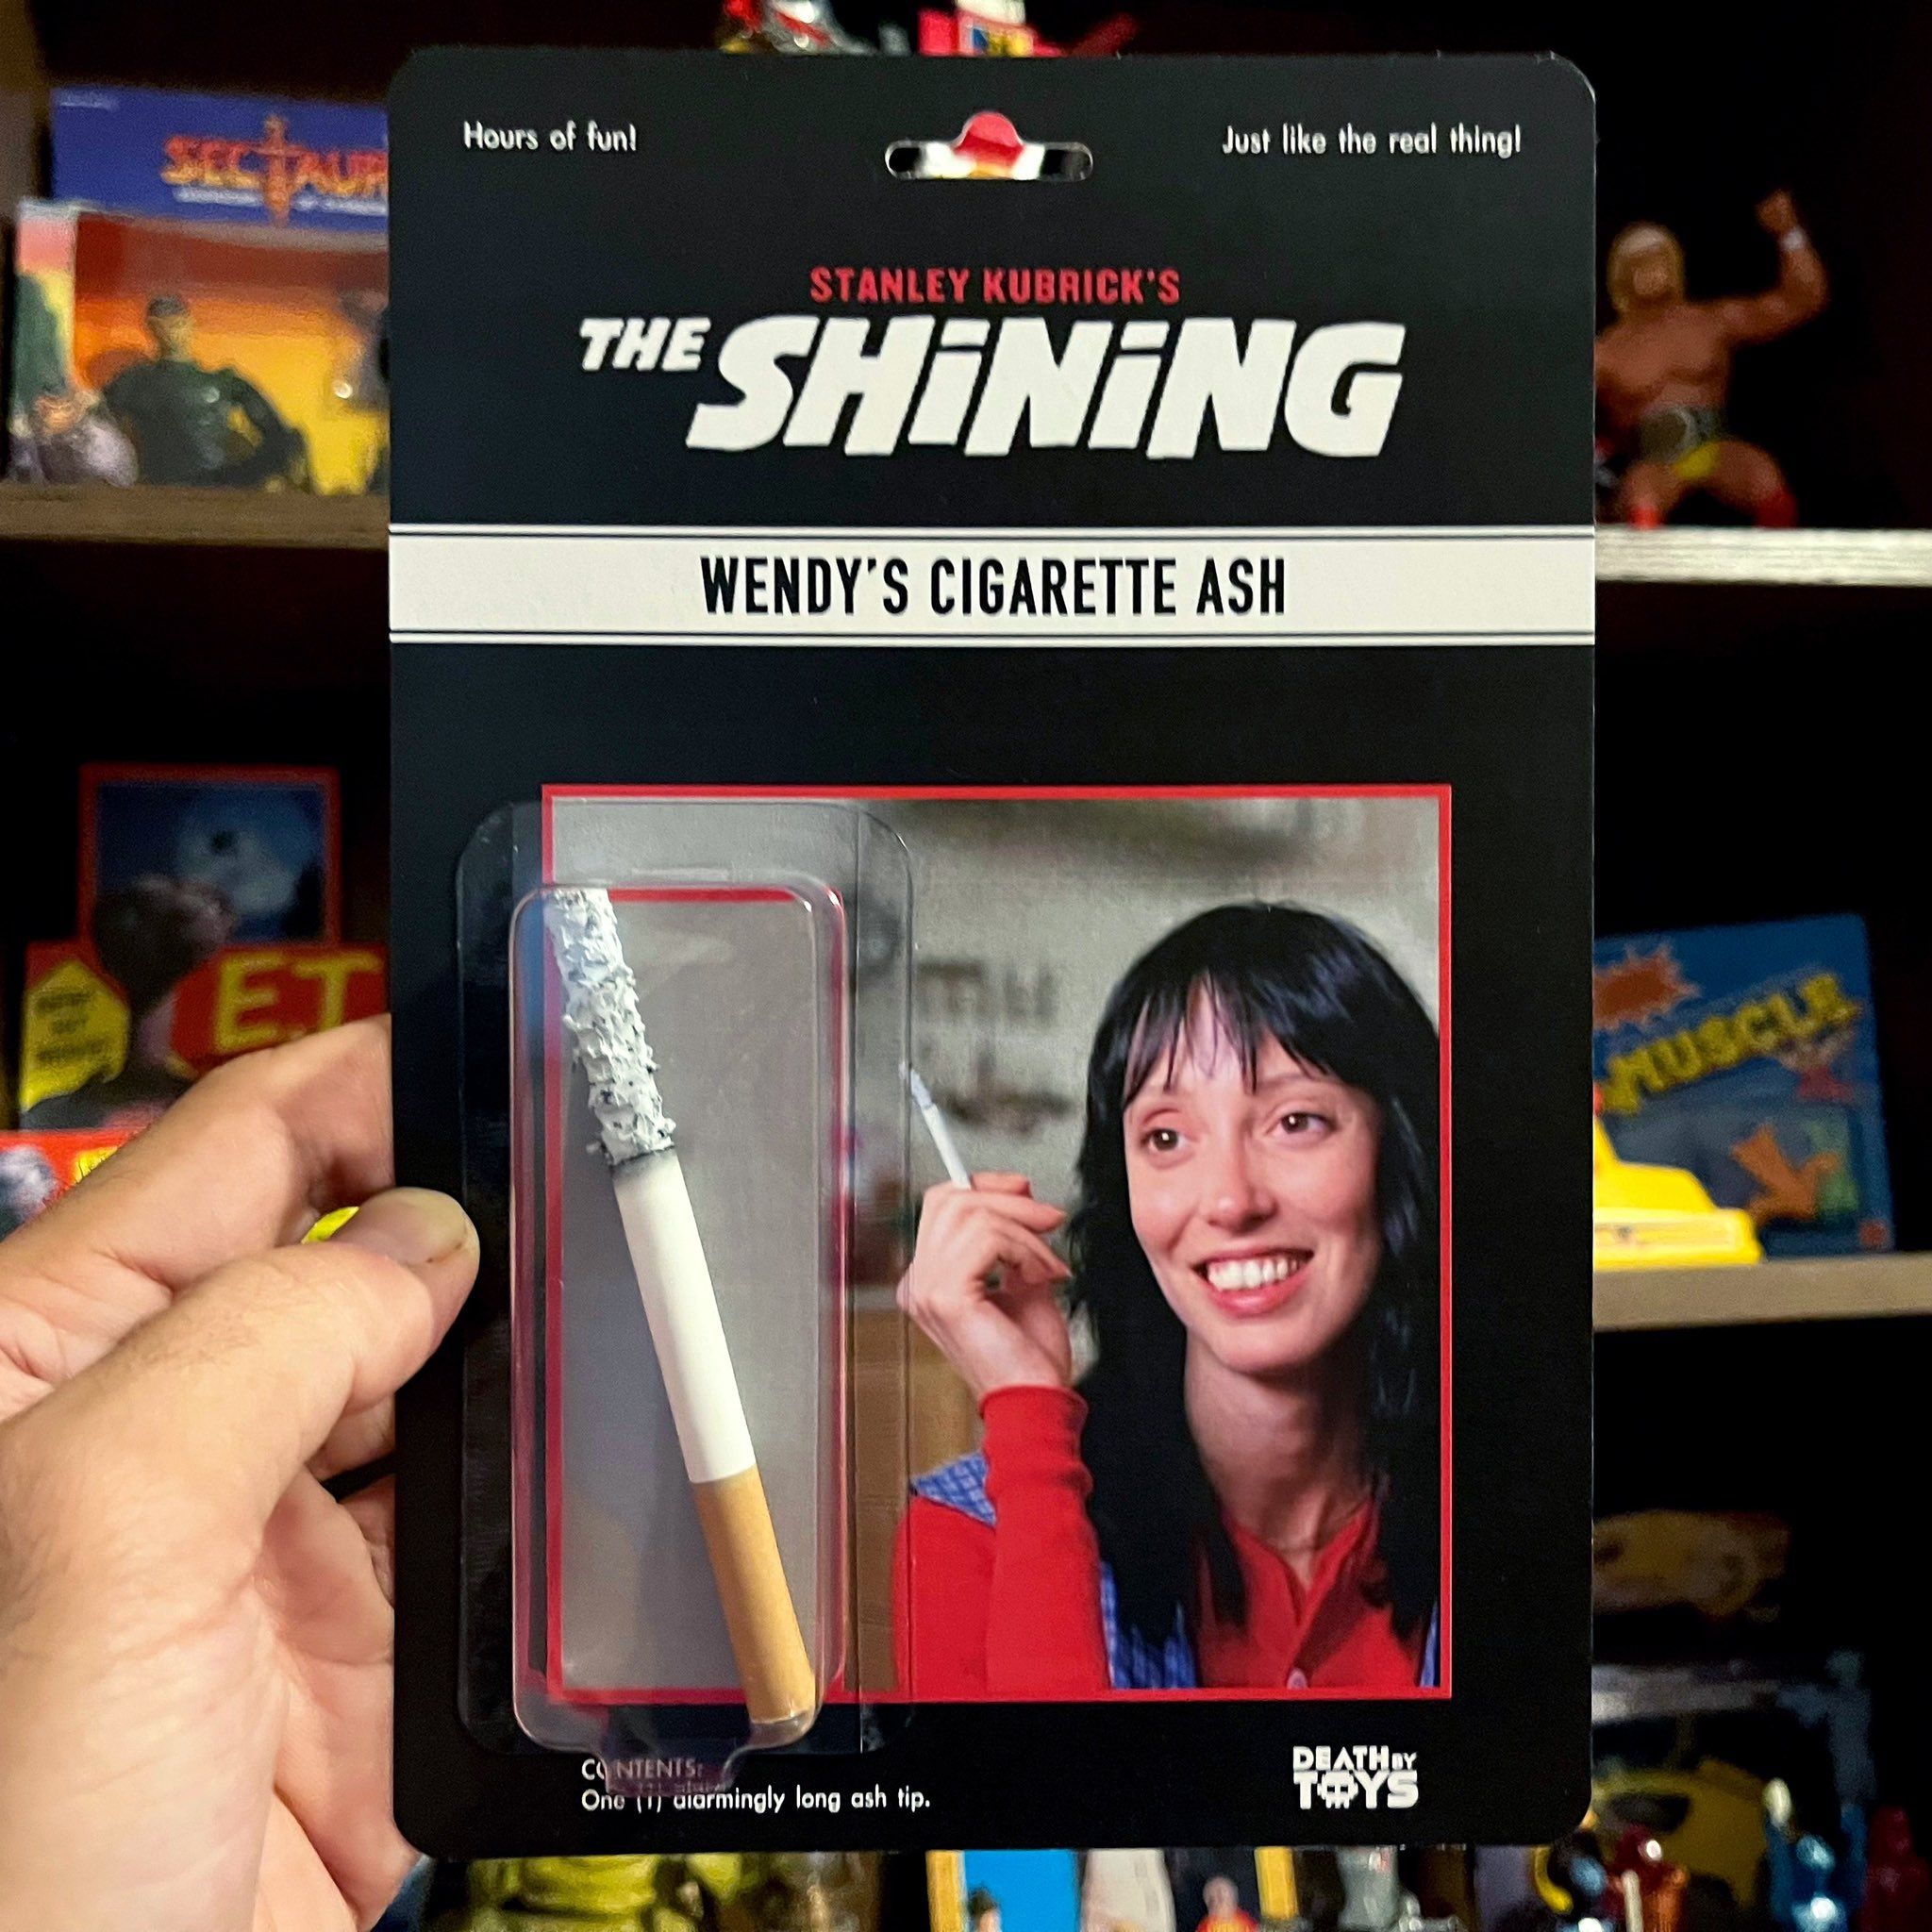 Toy based on one of the most tense and unsettling moments from The Shining.